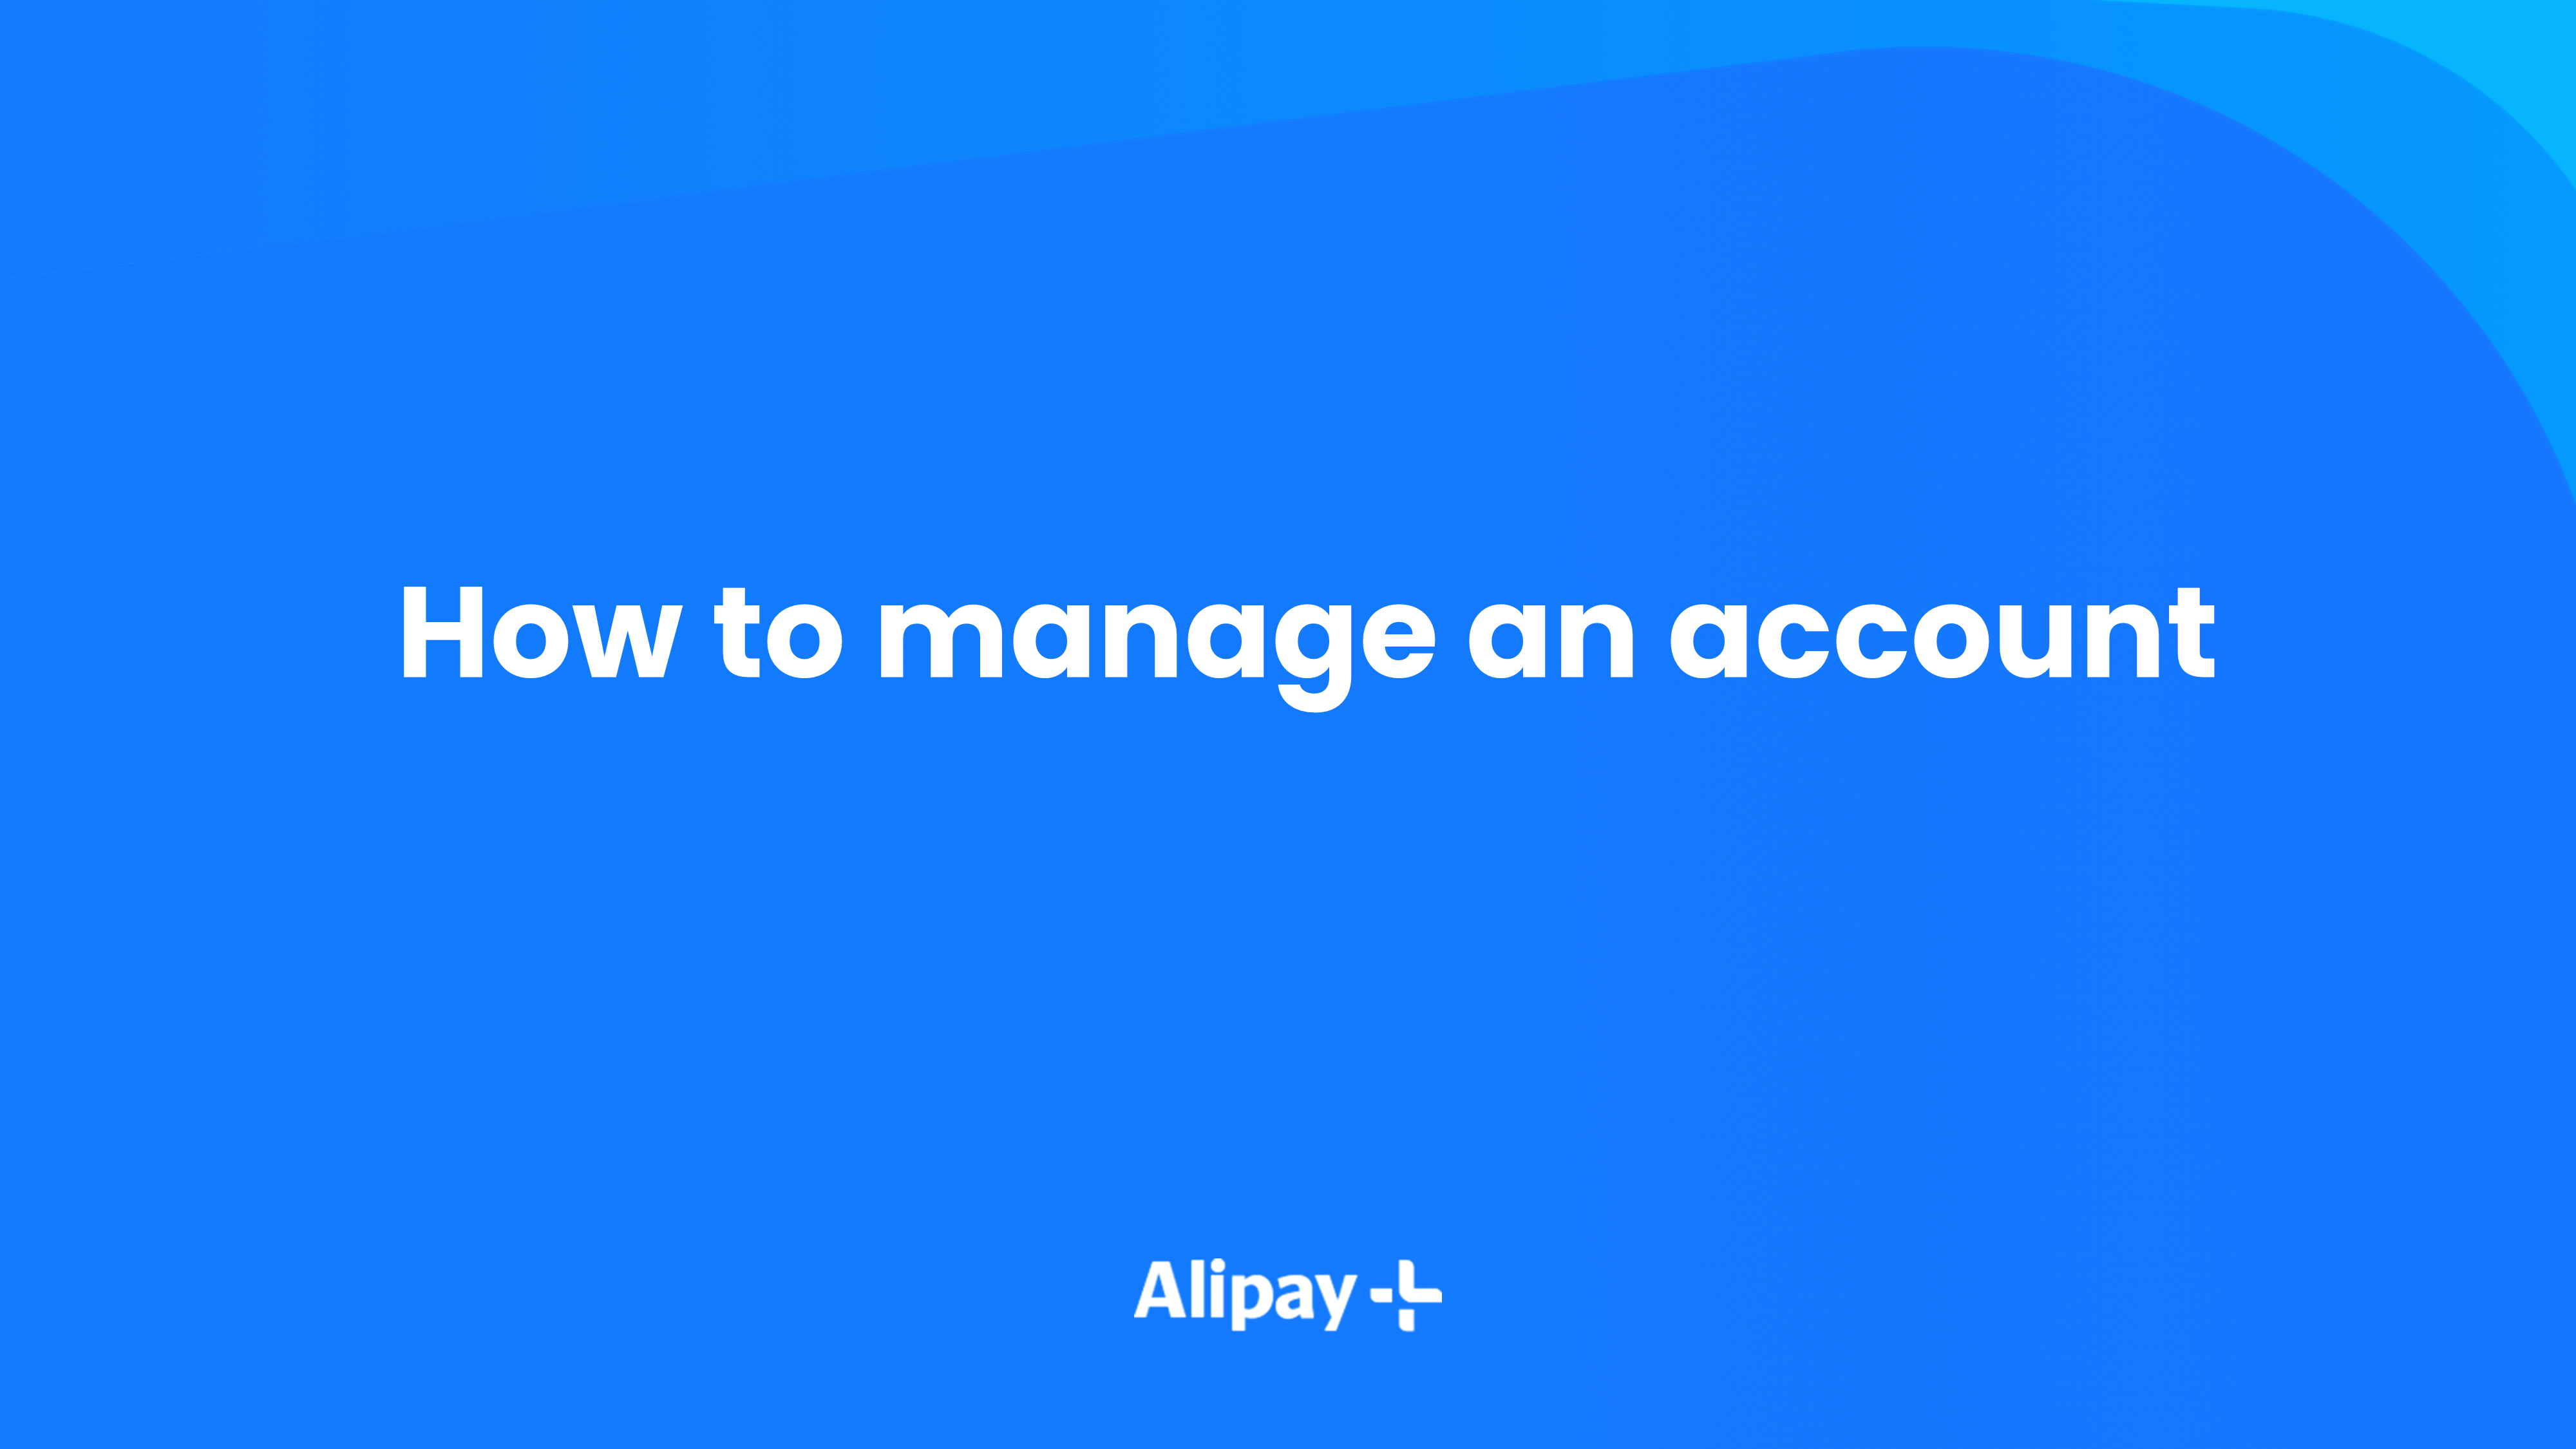 How to manage an account